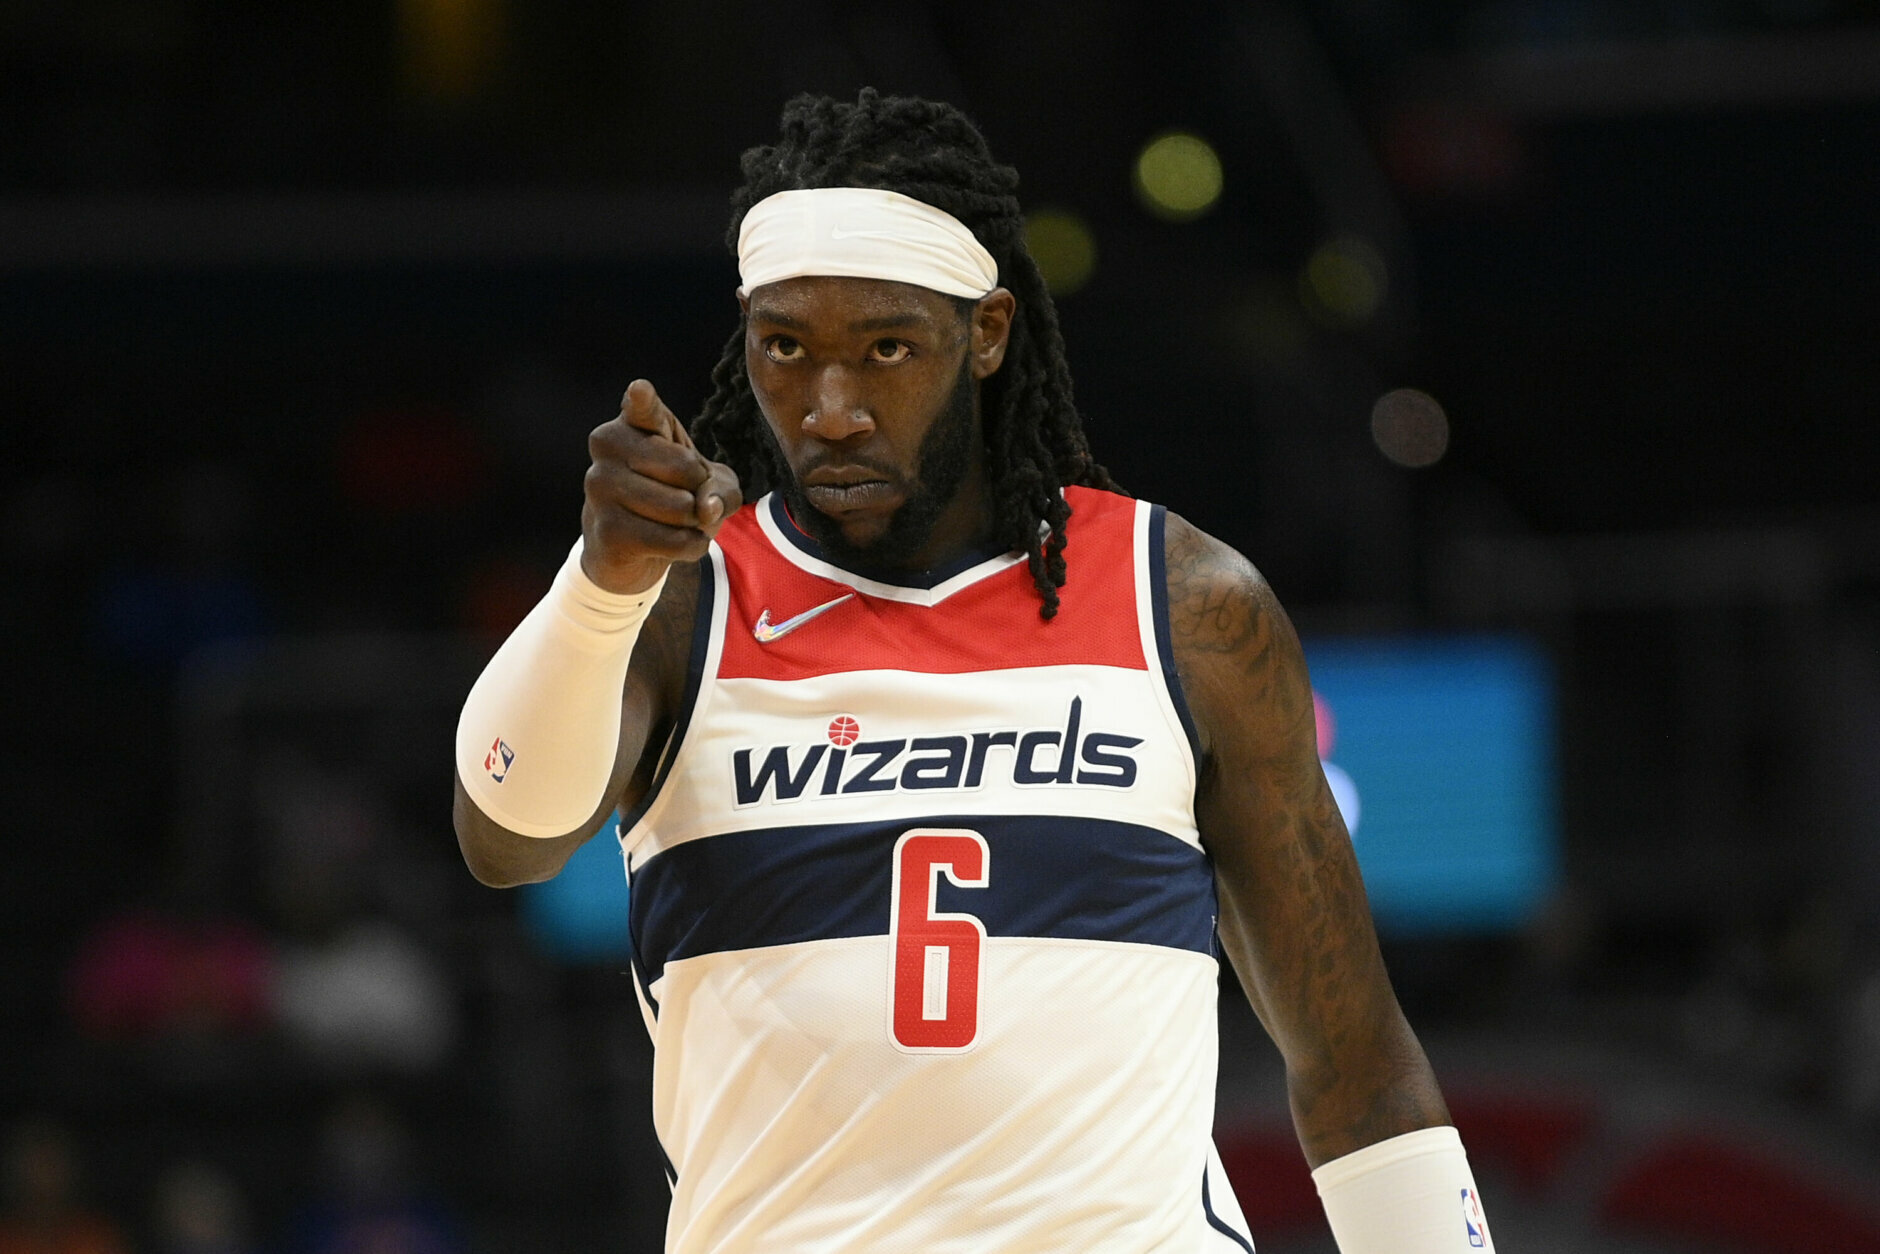 Washington Wizards center Montrezl Harrell points during the first half of an NBA preseason basketball game against the New York Knicks, Saturday, Oct. 9, 2021, in Washington. (AP Photo/Nick Wass)